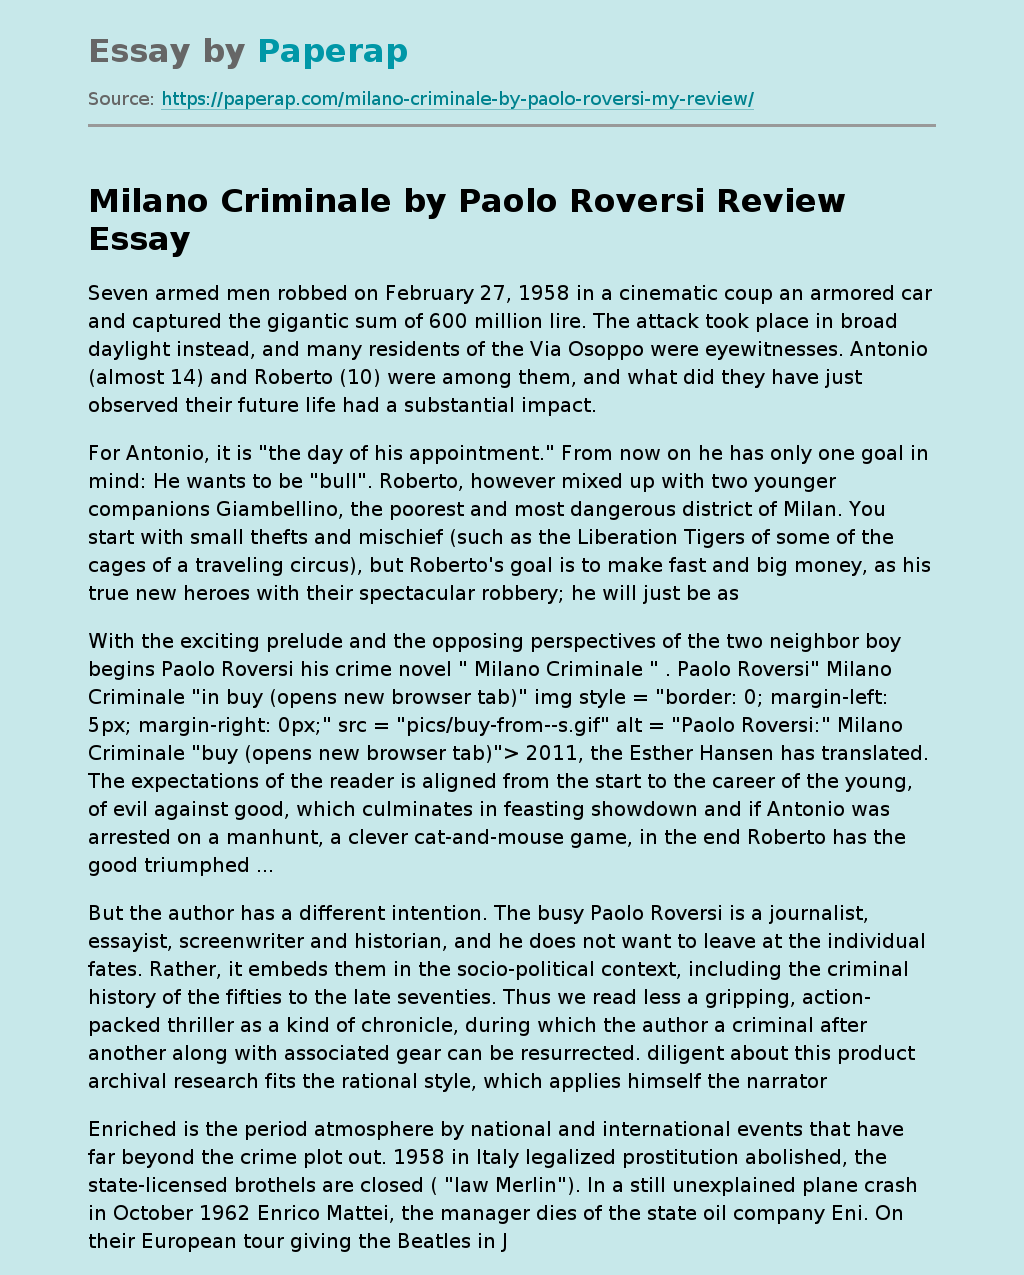 Milano Criminale by Paolo Roversi Review